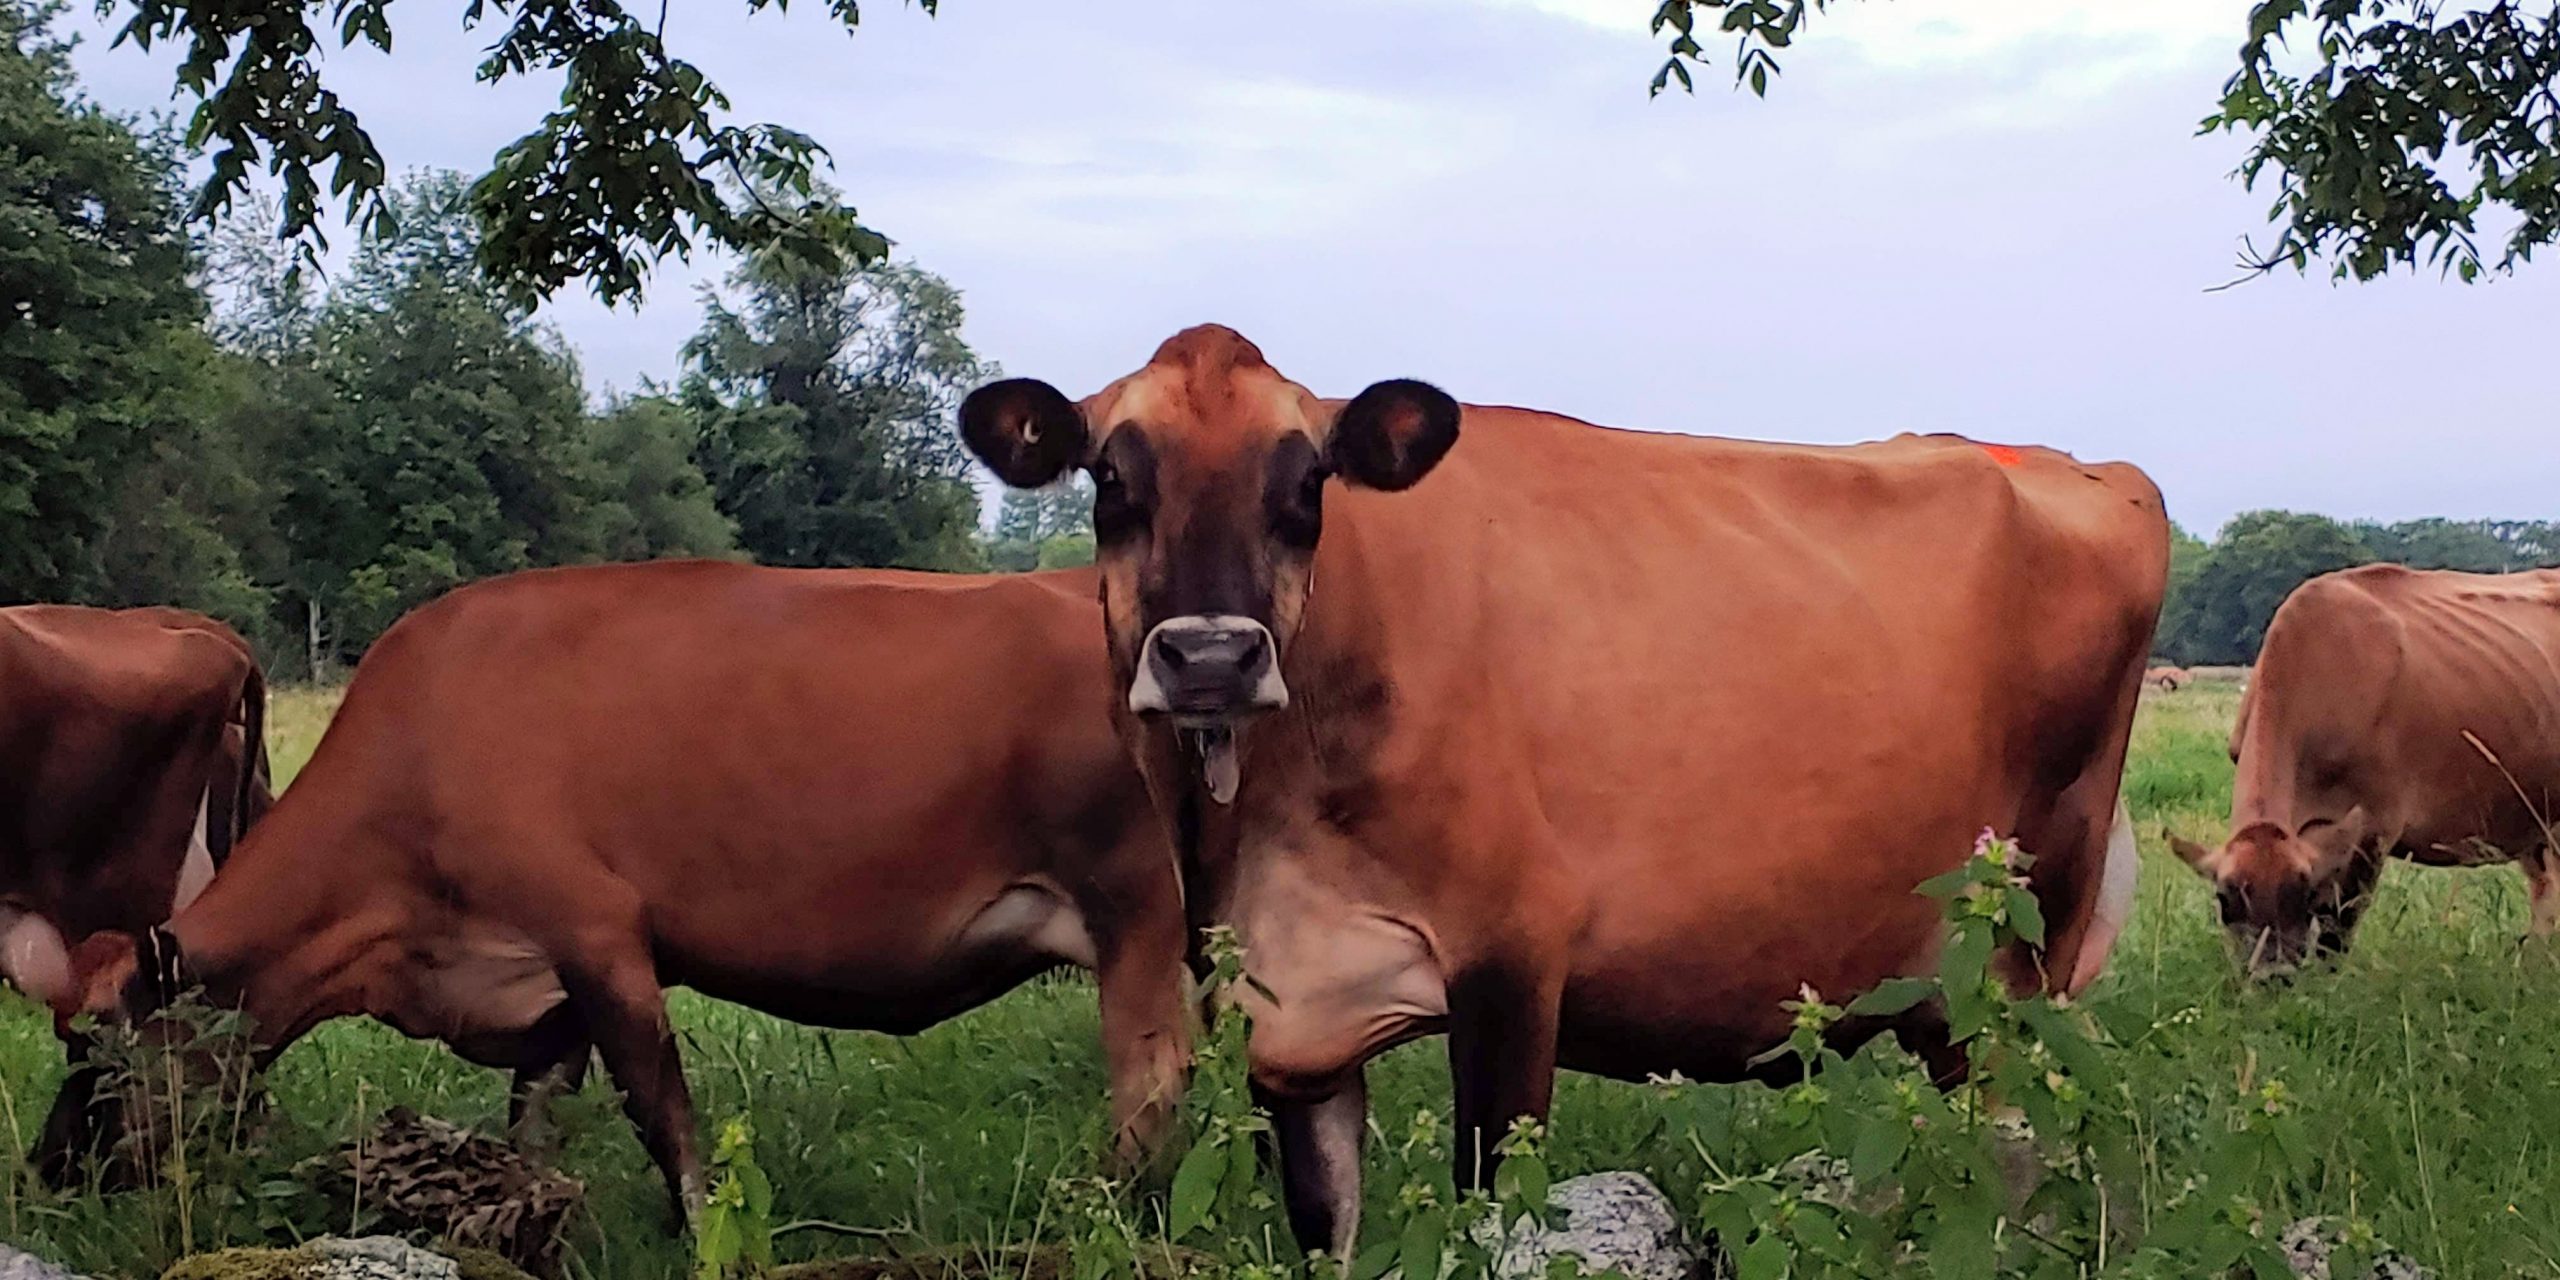 Why are those cows so skinny? - Animal Agriculture Alliance